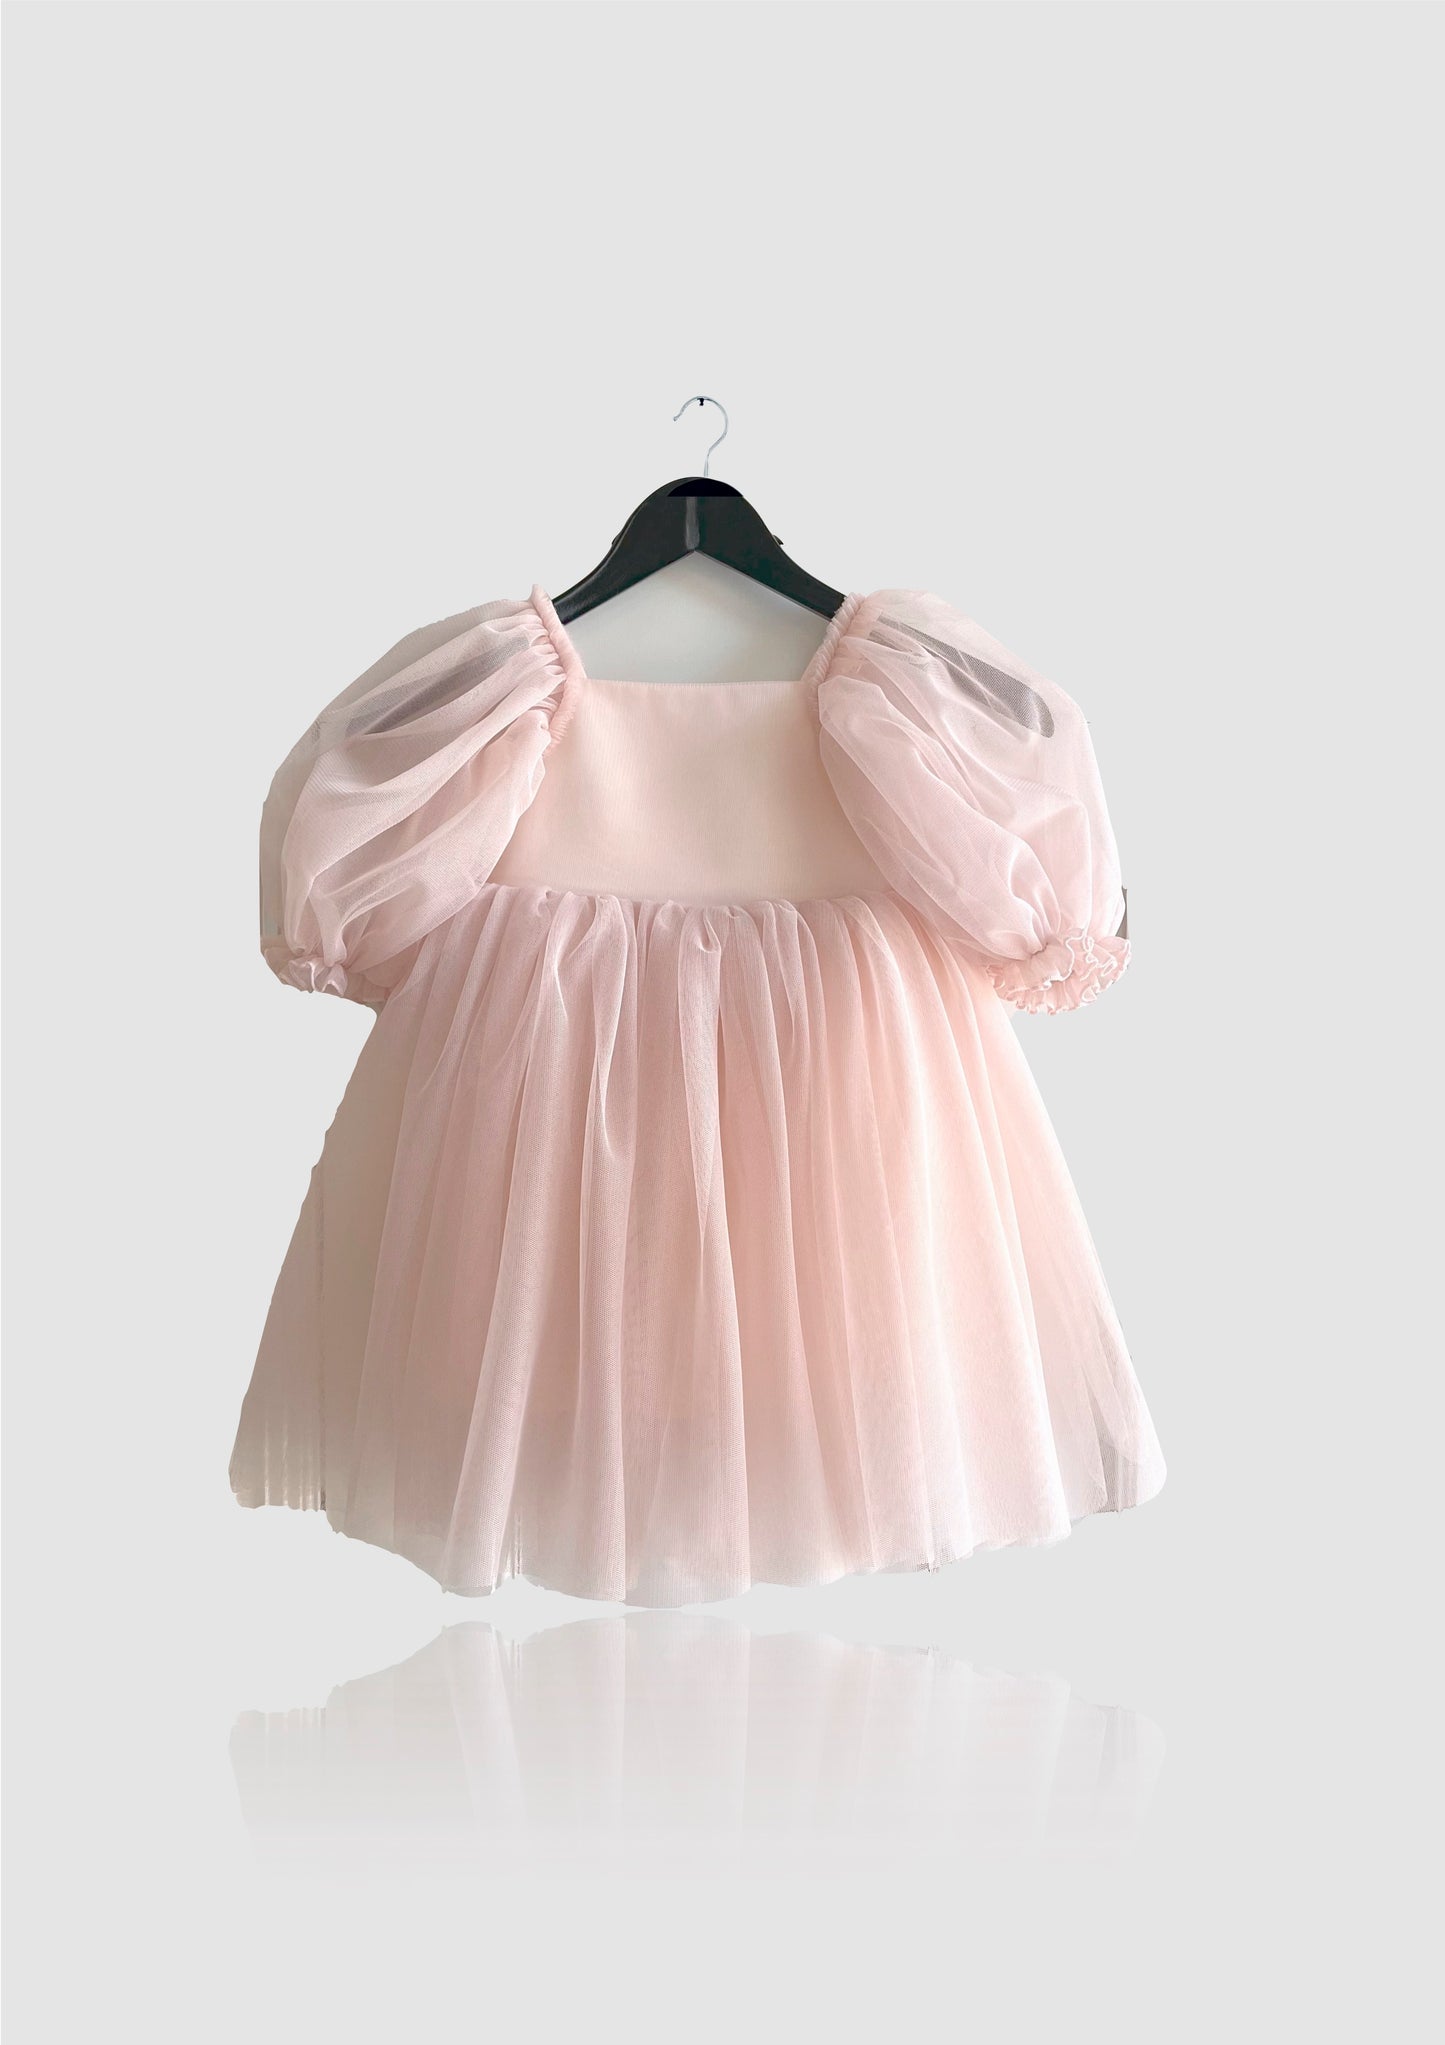 DOLLY by Le Petit Tom ® TULLE BABYDOLL DRESS dollypink